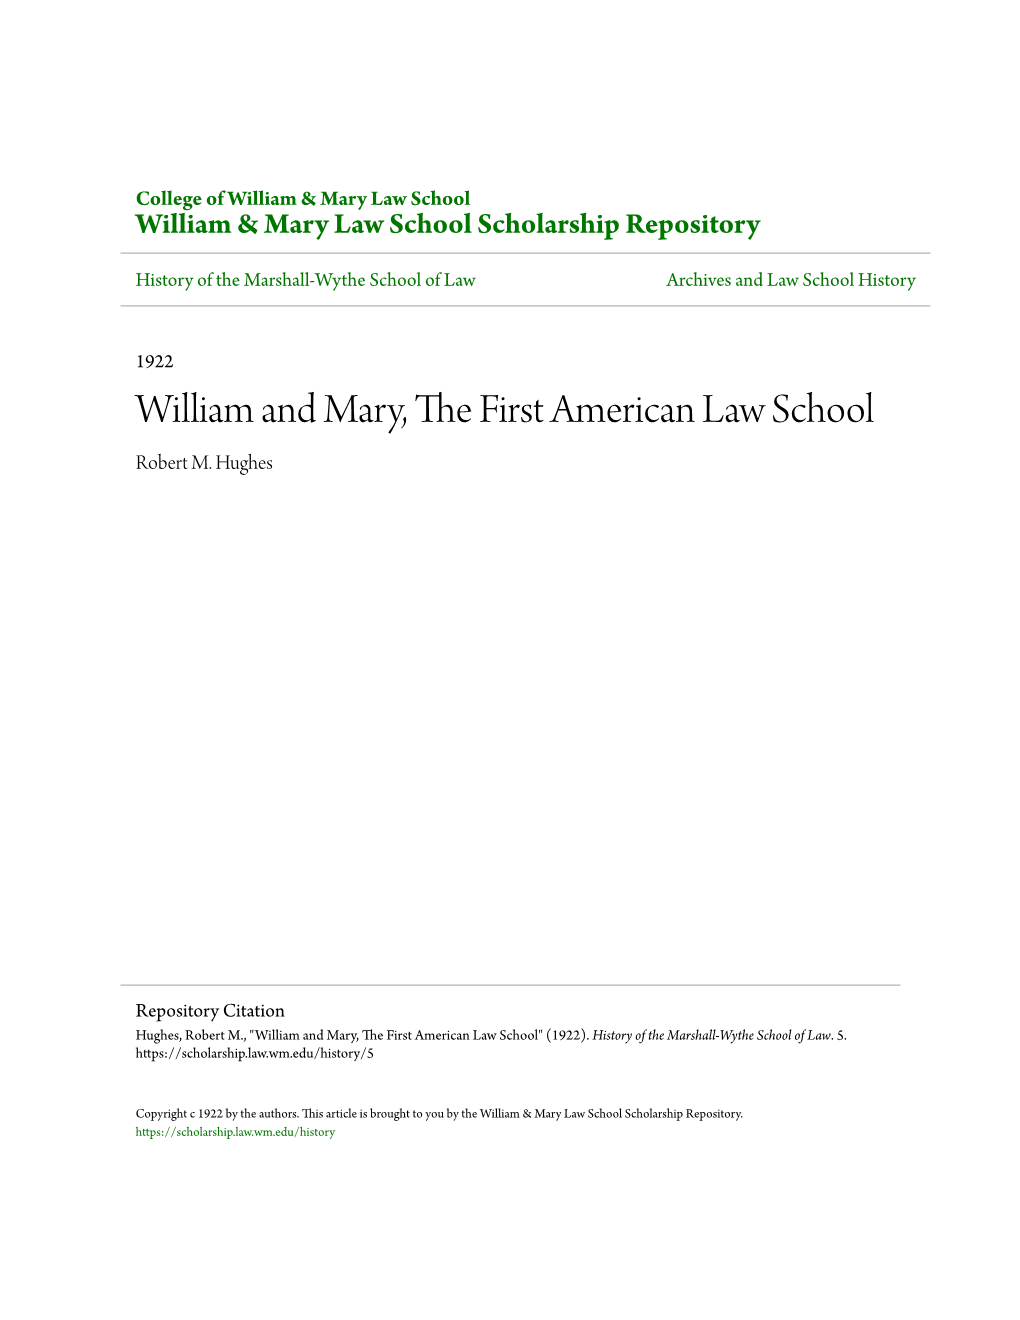 William and Mary, the First American Law School